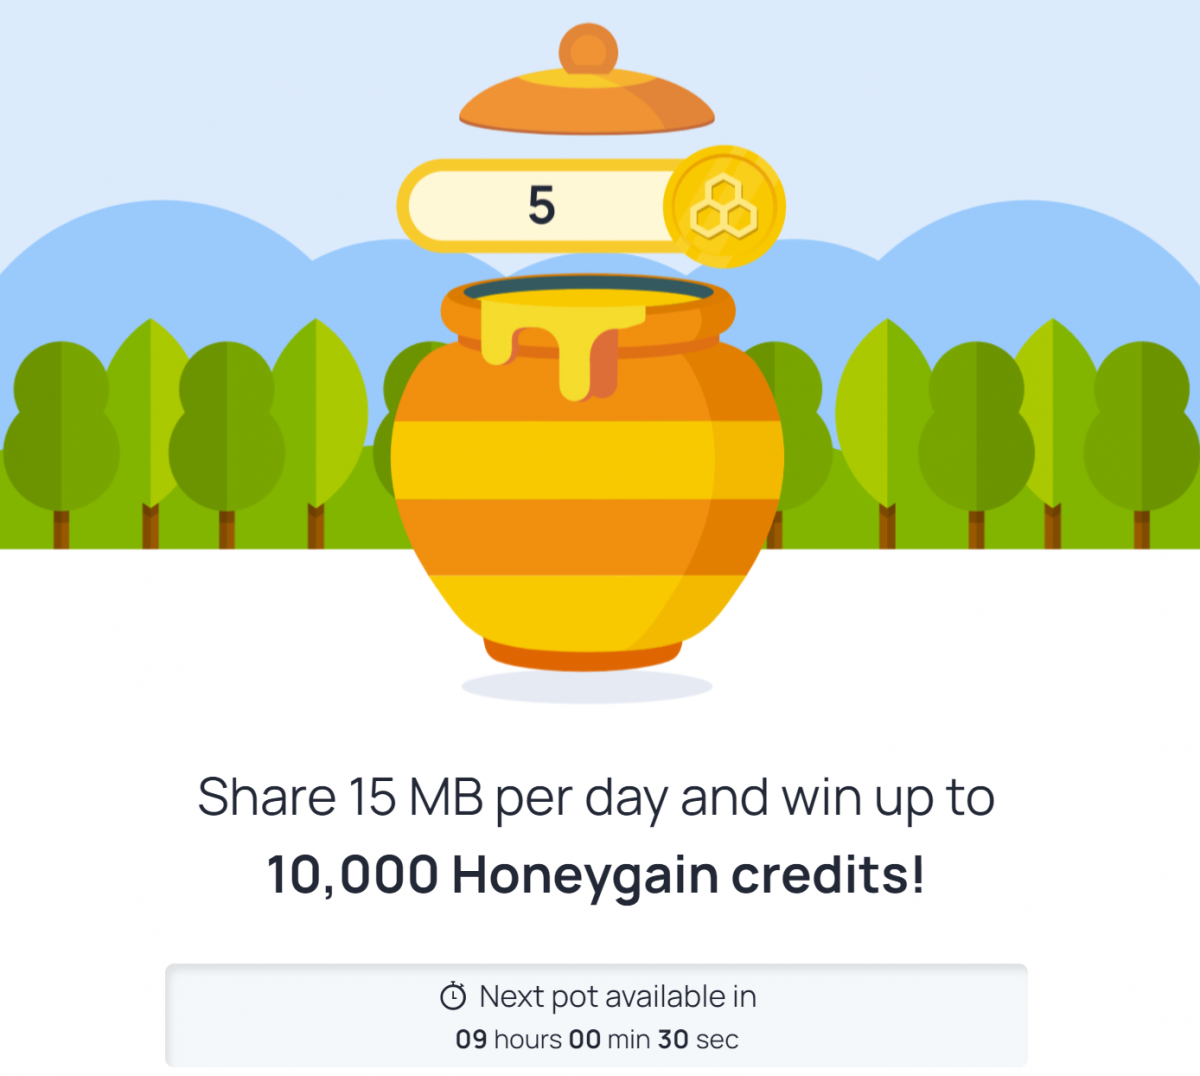 honeygain's lucky pot feature allows users to win a free 5 to 10,000 credits each day